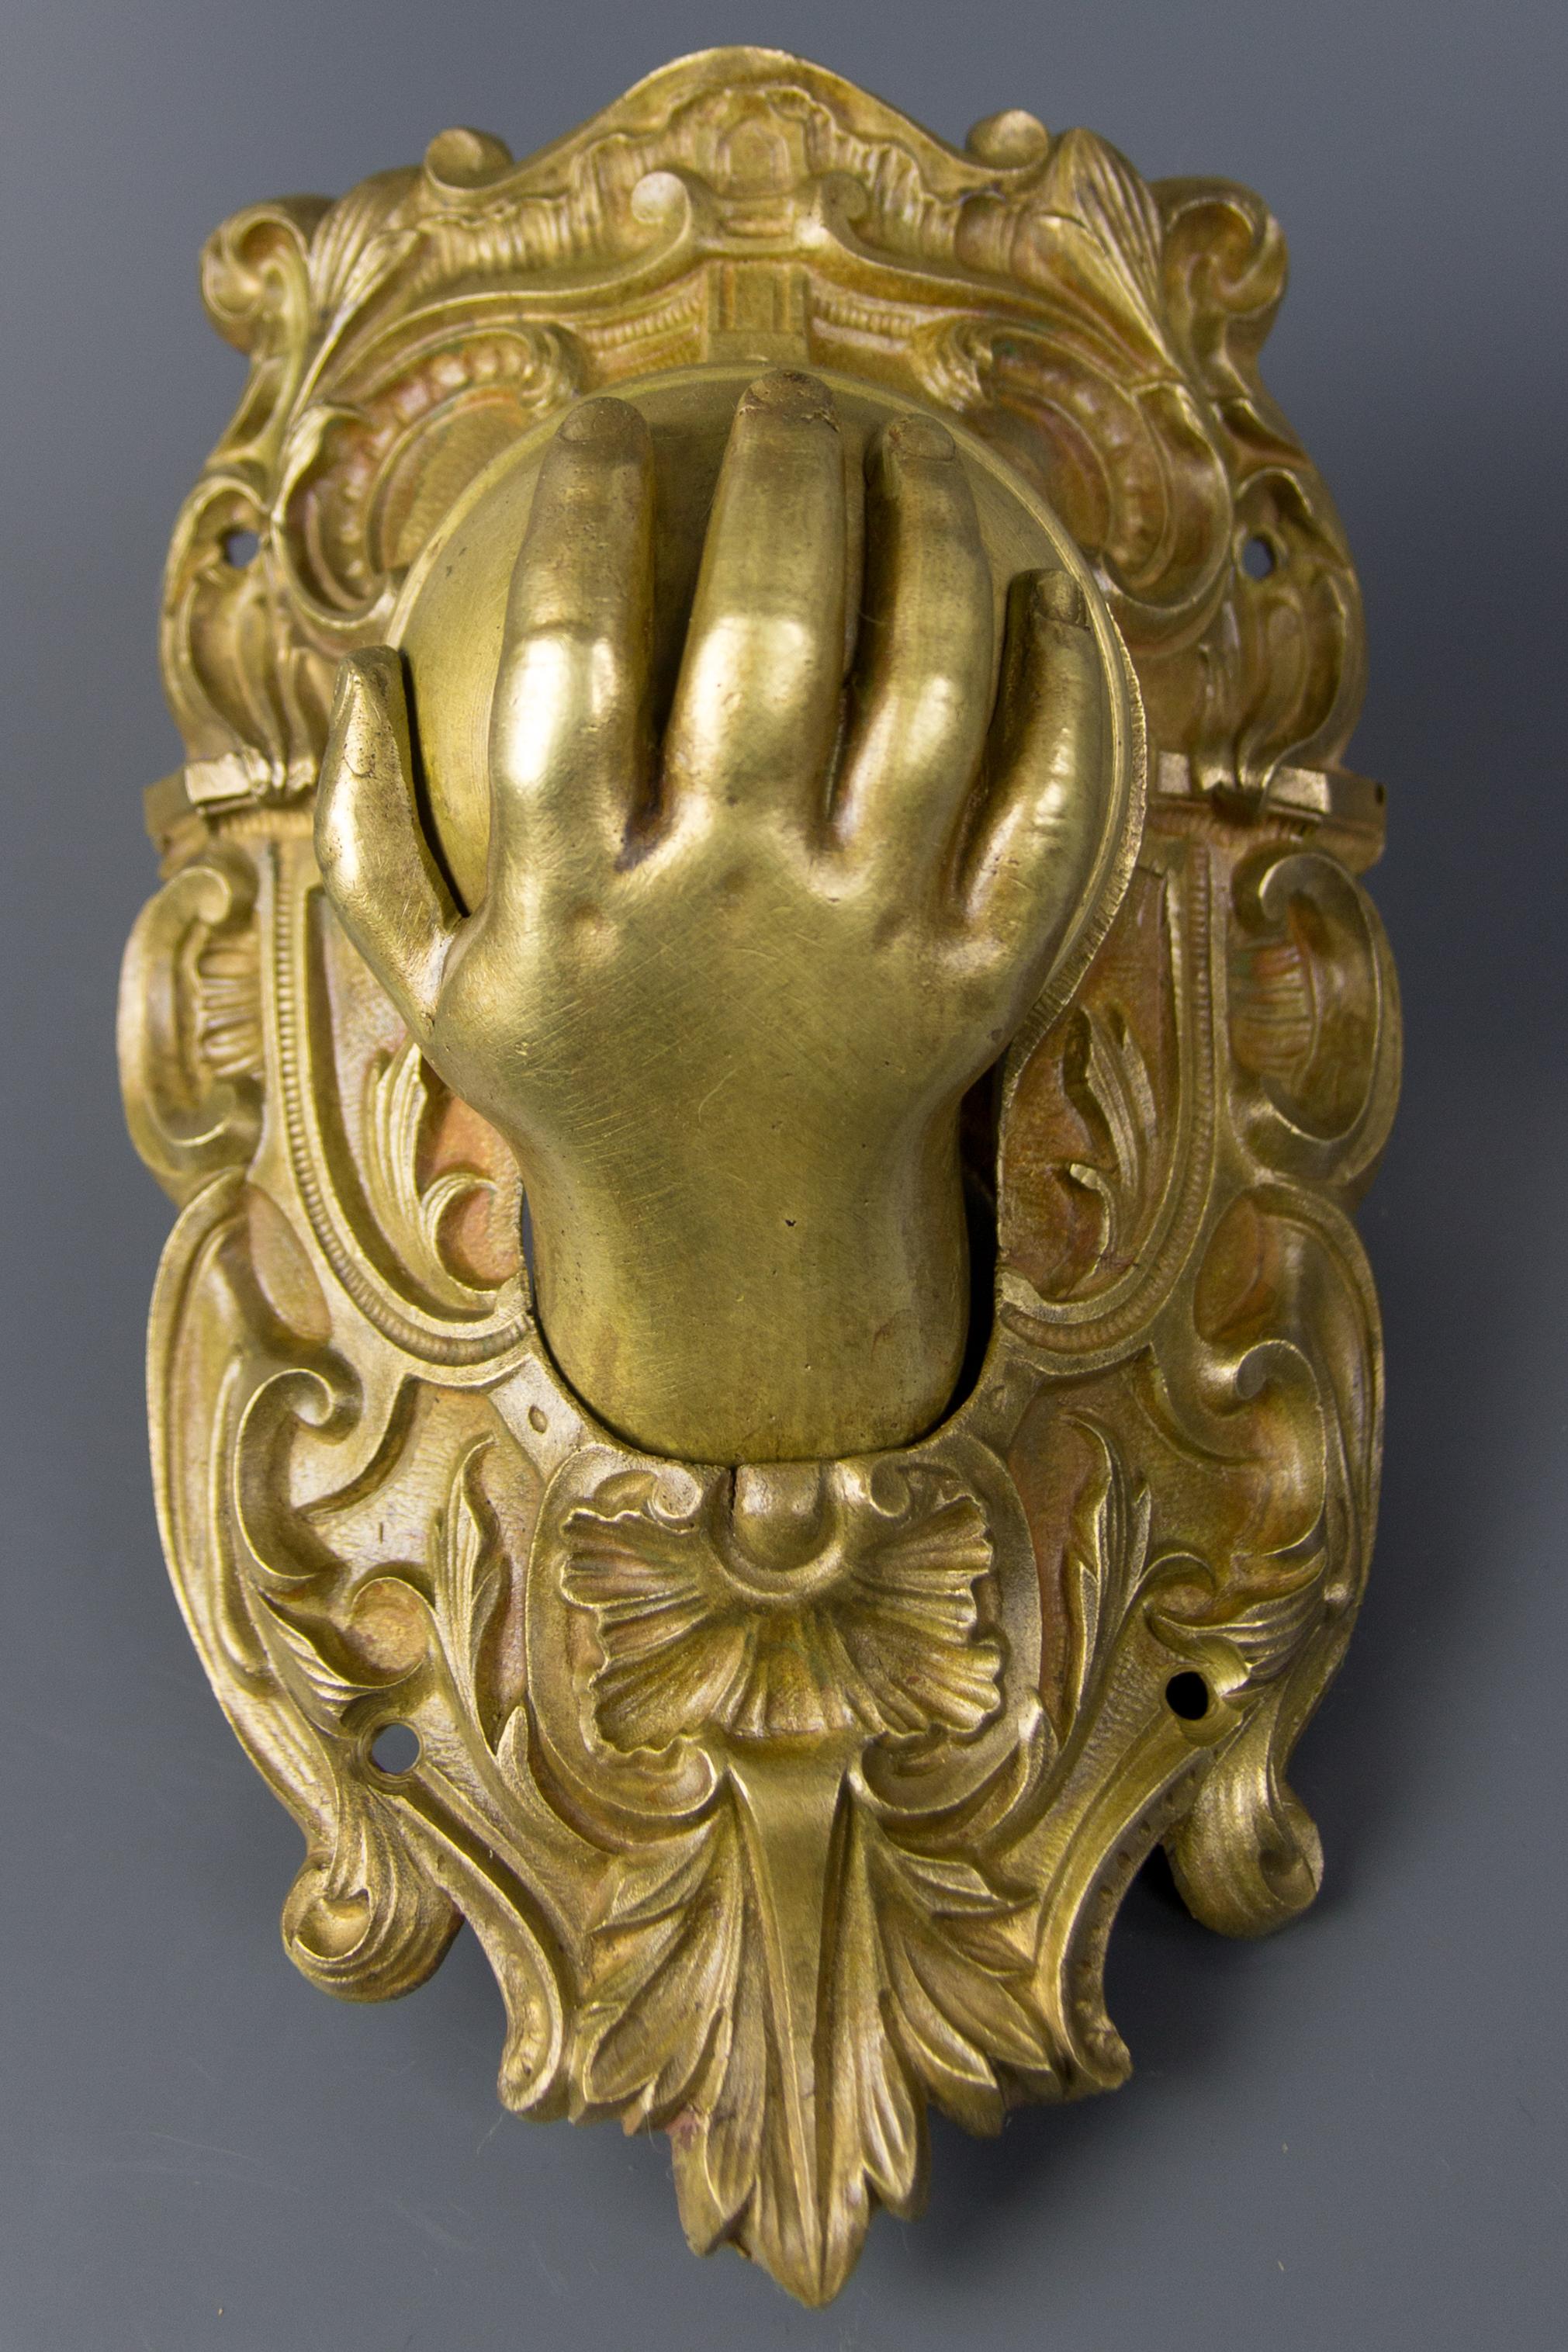 Antique Ornate French bronze billiard corner pocket ball catcher with a baby hand from the late 19th century. It was originally part of the ornate decoration of a large billiard table and would have been positioned on one of the corner pockets. The